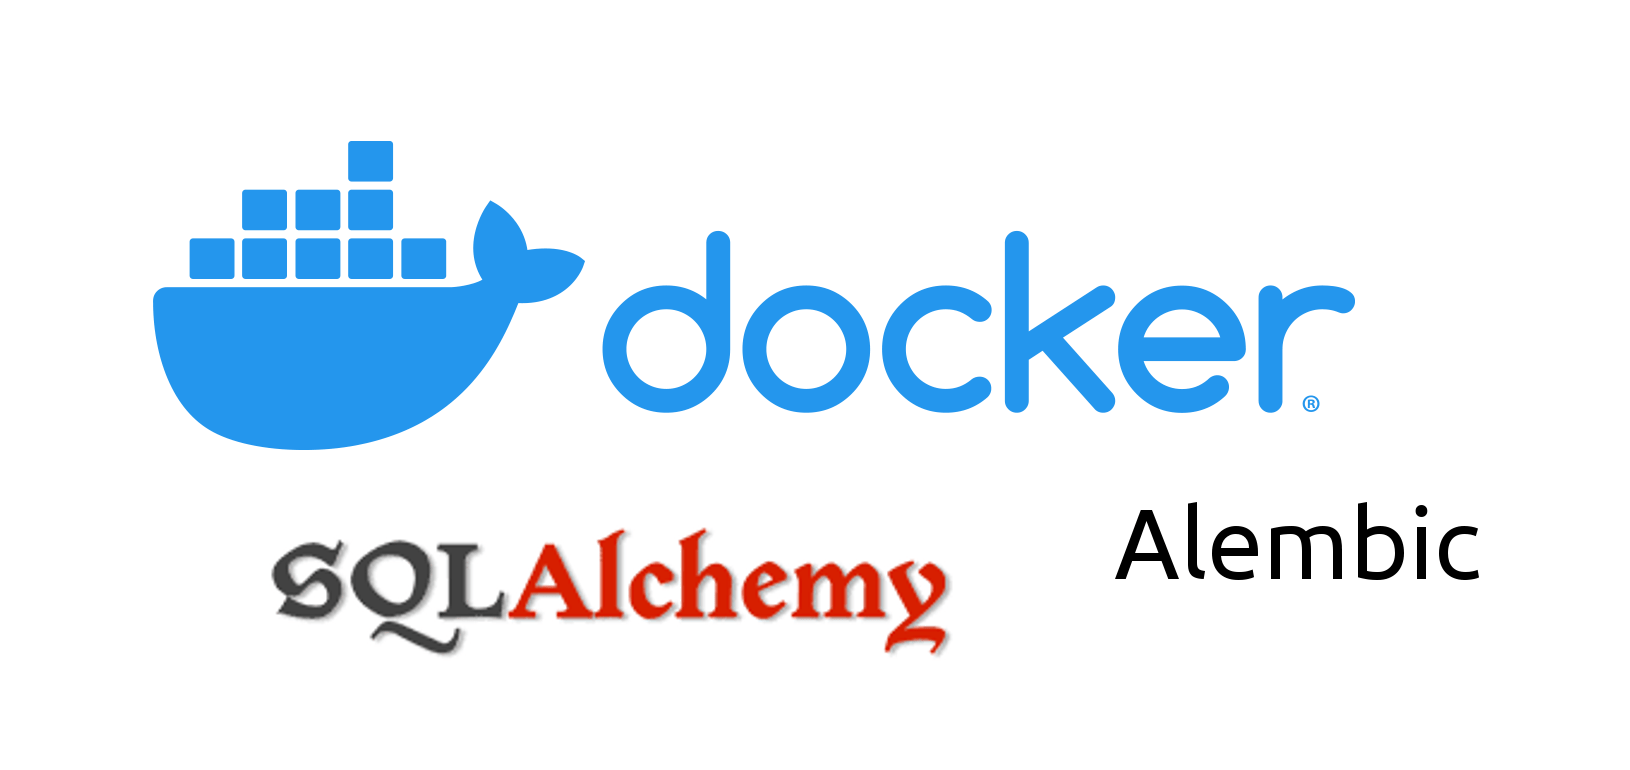 The logos of Docker, SQLAlchemy, and Alembic